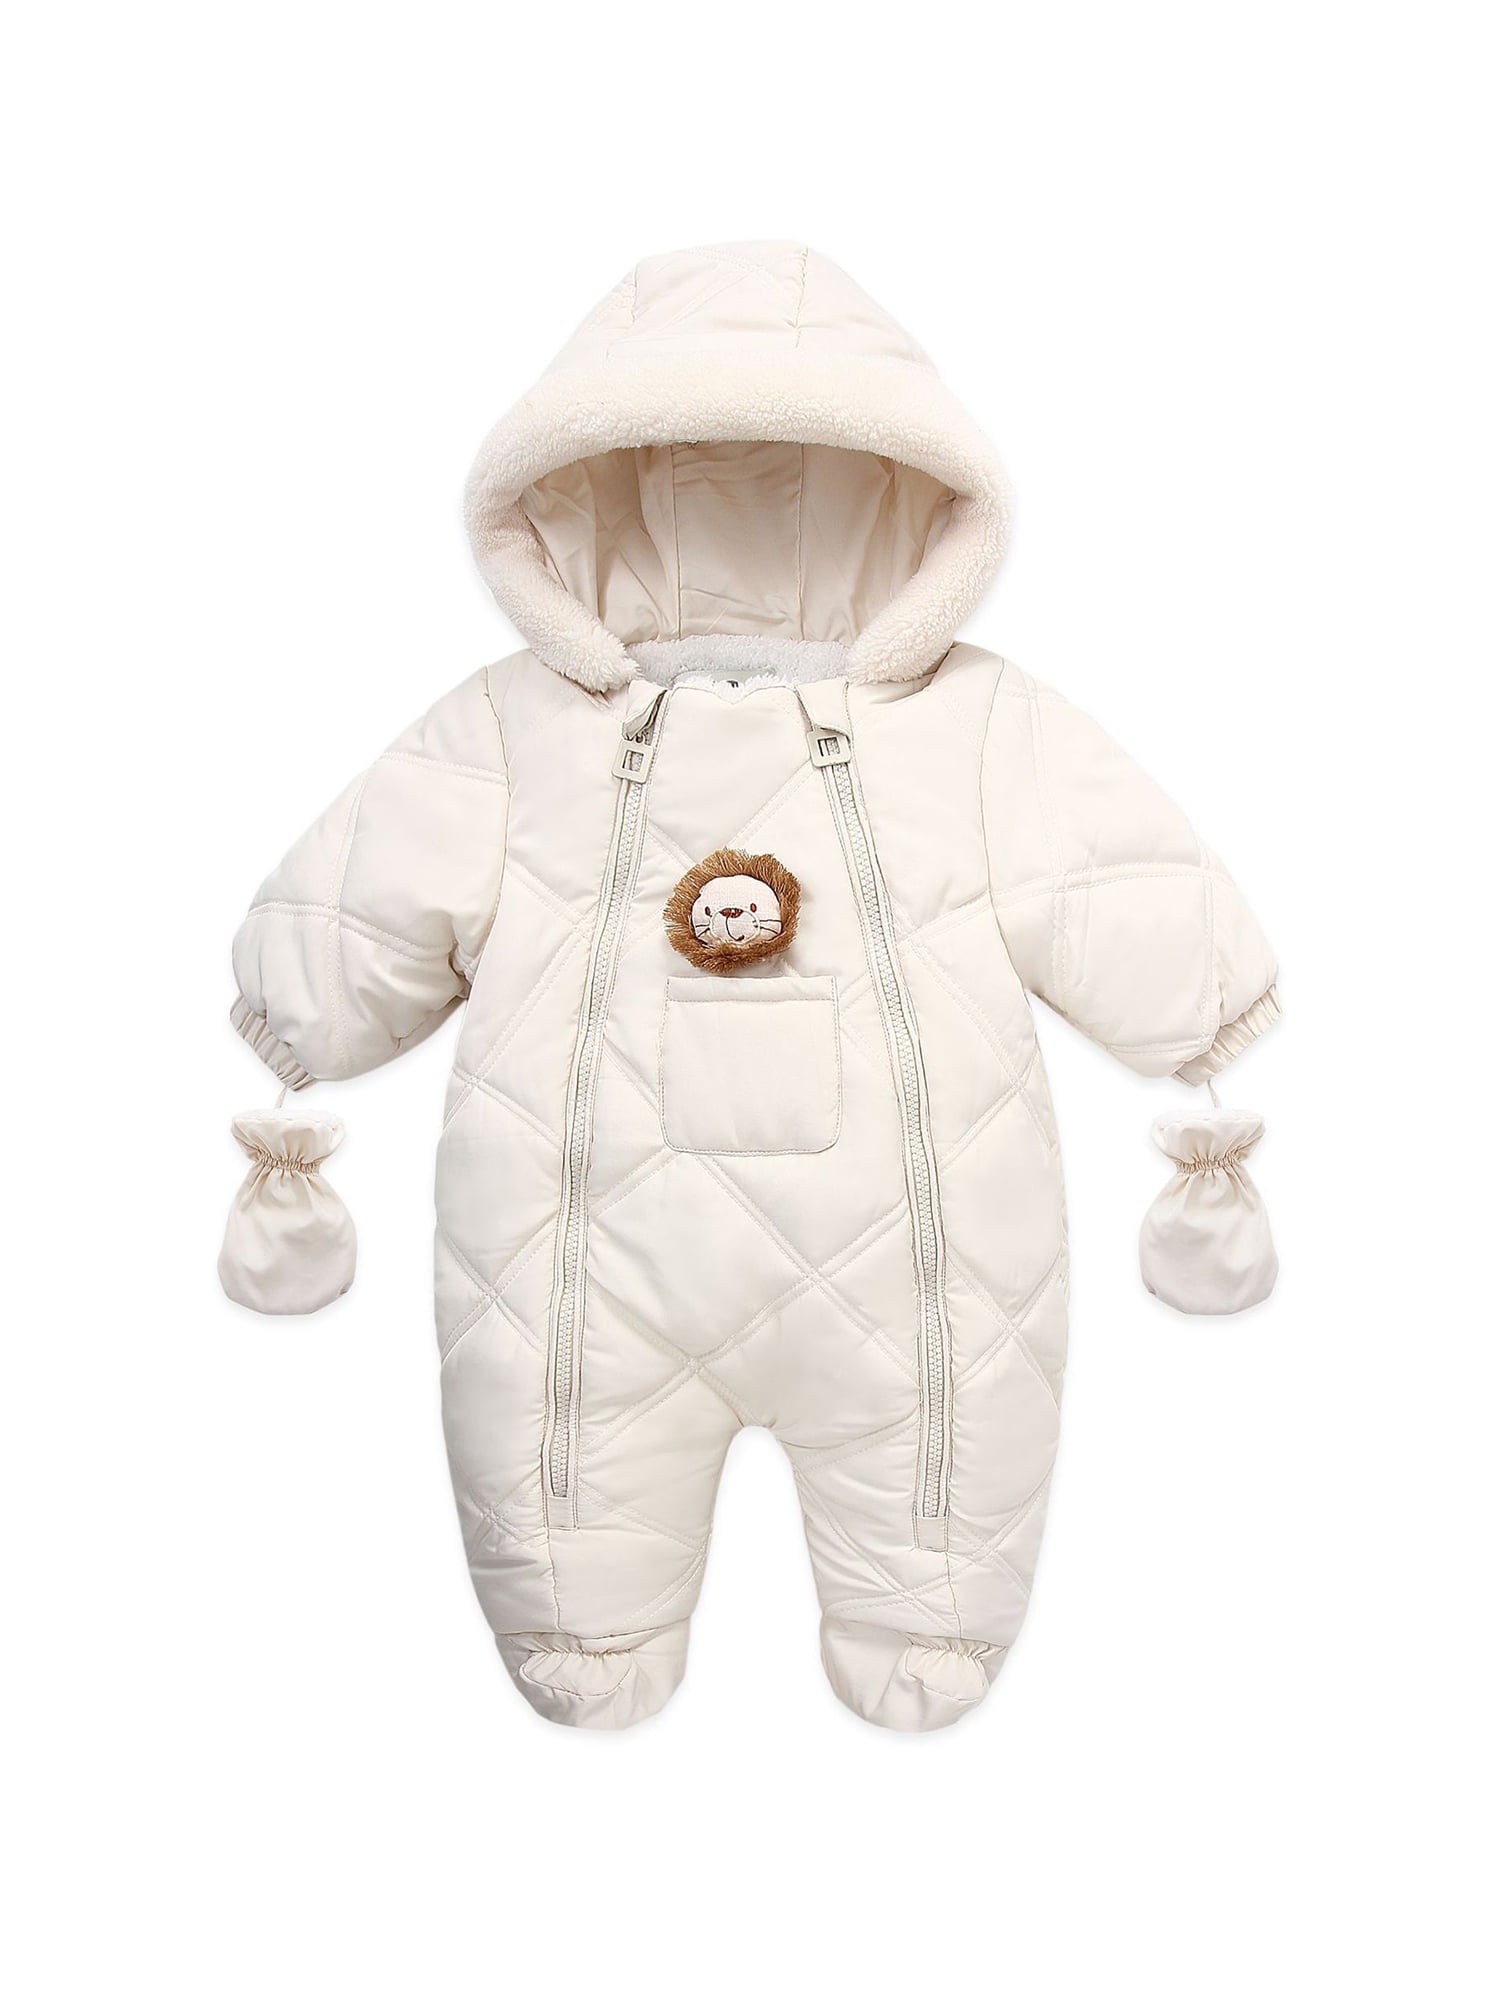 Baby Snowsuit Hooded Overalls with Footie Winter Romper Cotton Onesies Winter Jacket Outfits 3-18 Months 